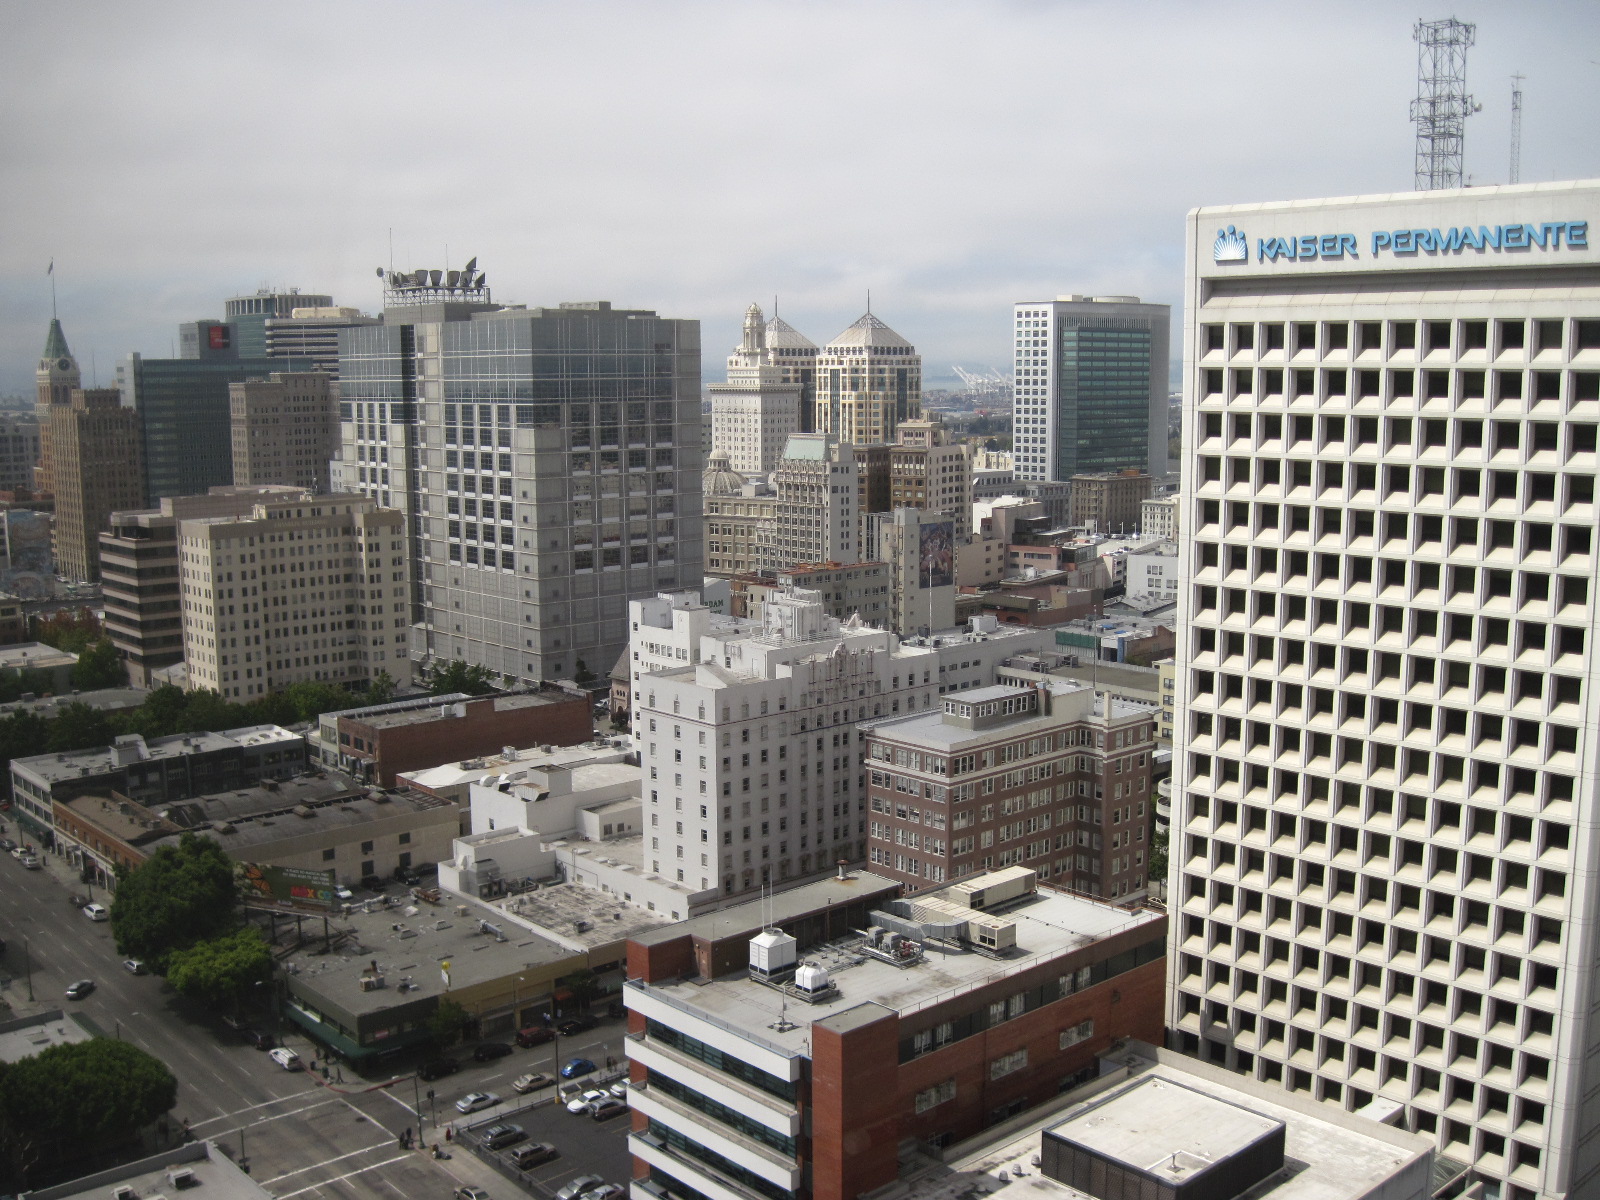 The skyline of downtown Oakland